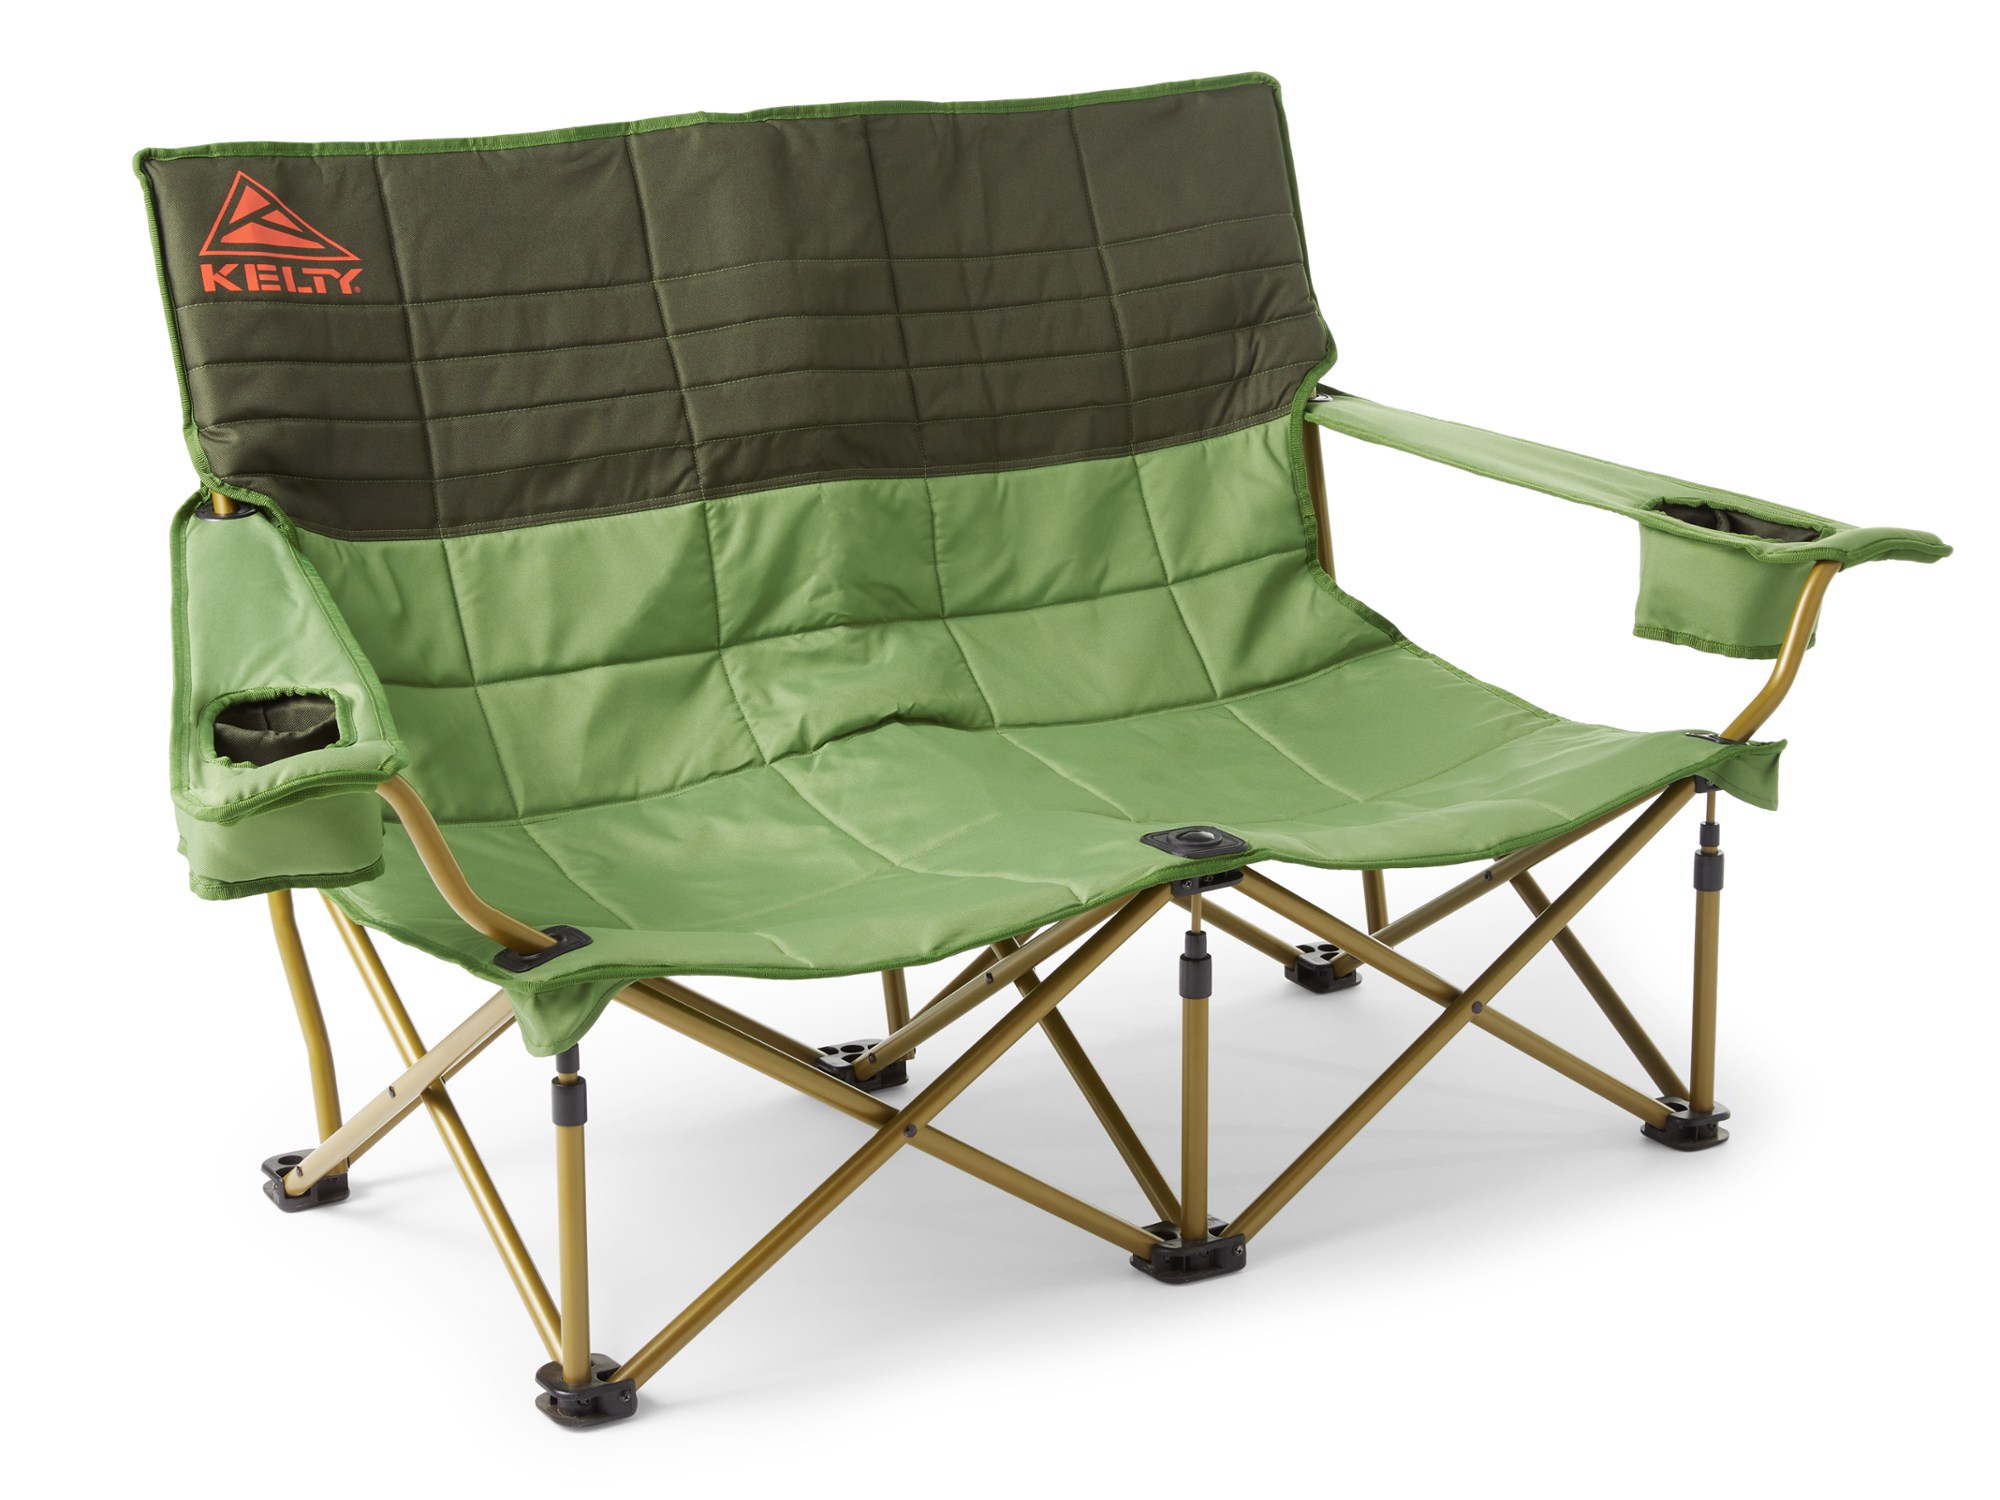 Kelty Low Loveseat camping chair